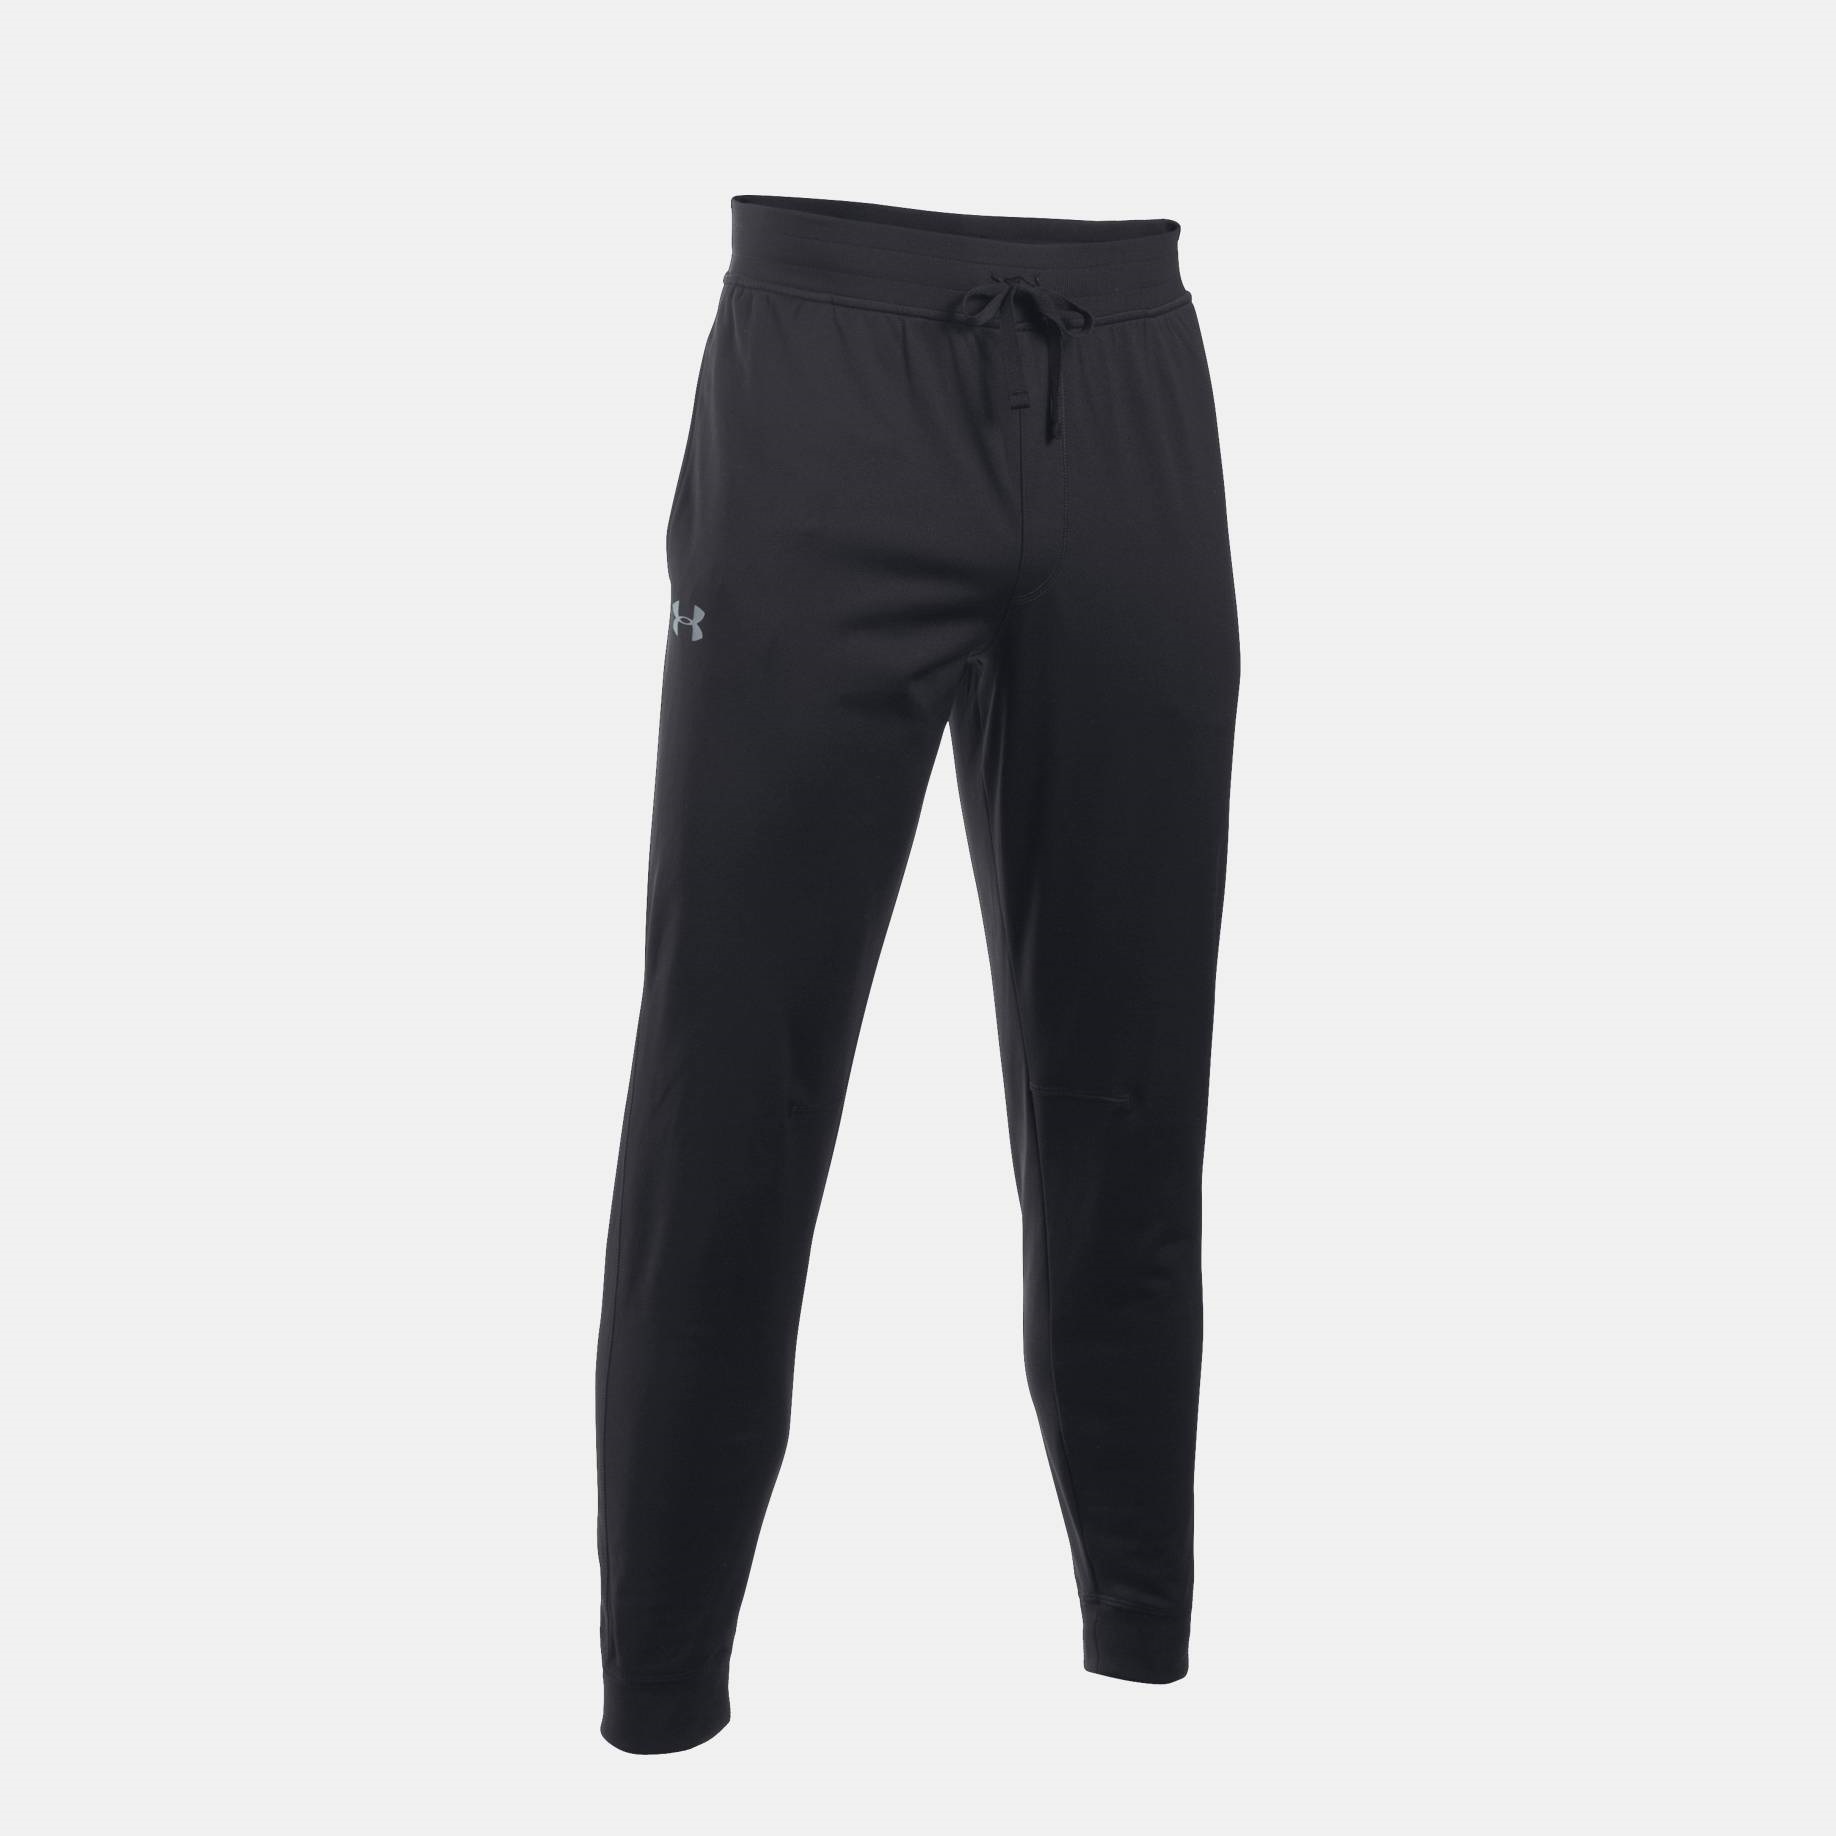  -  under armour Sportstyle Joggers